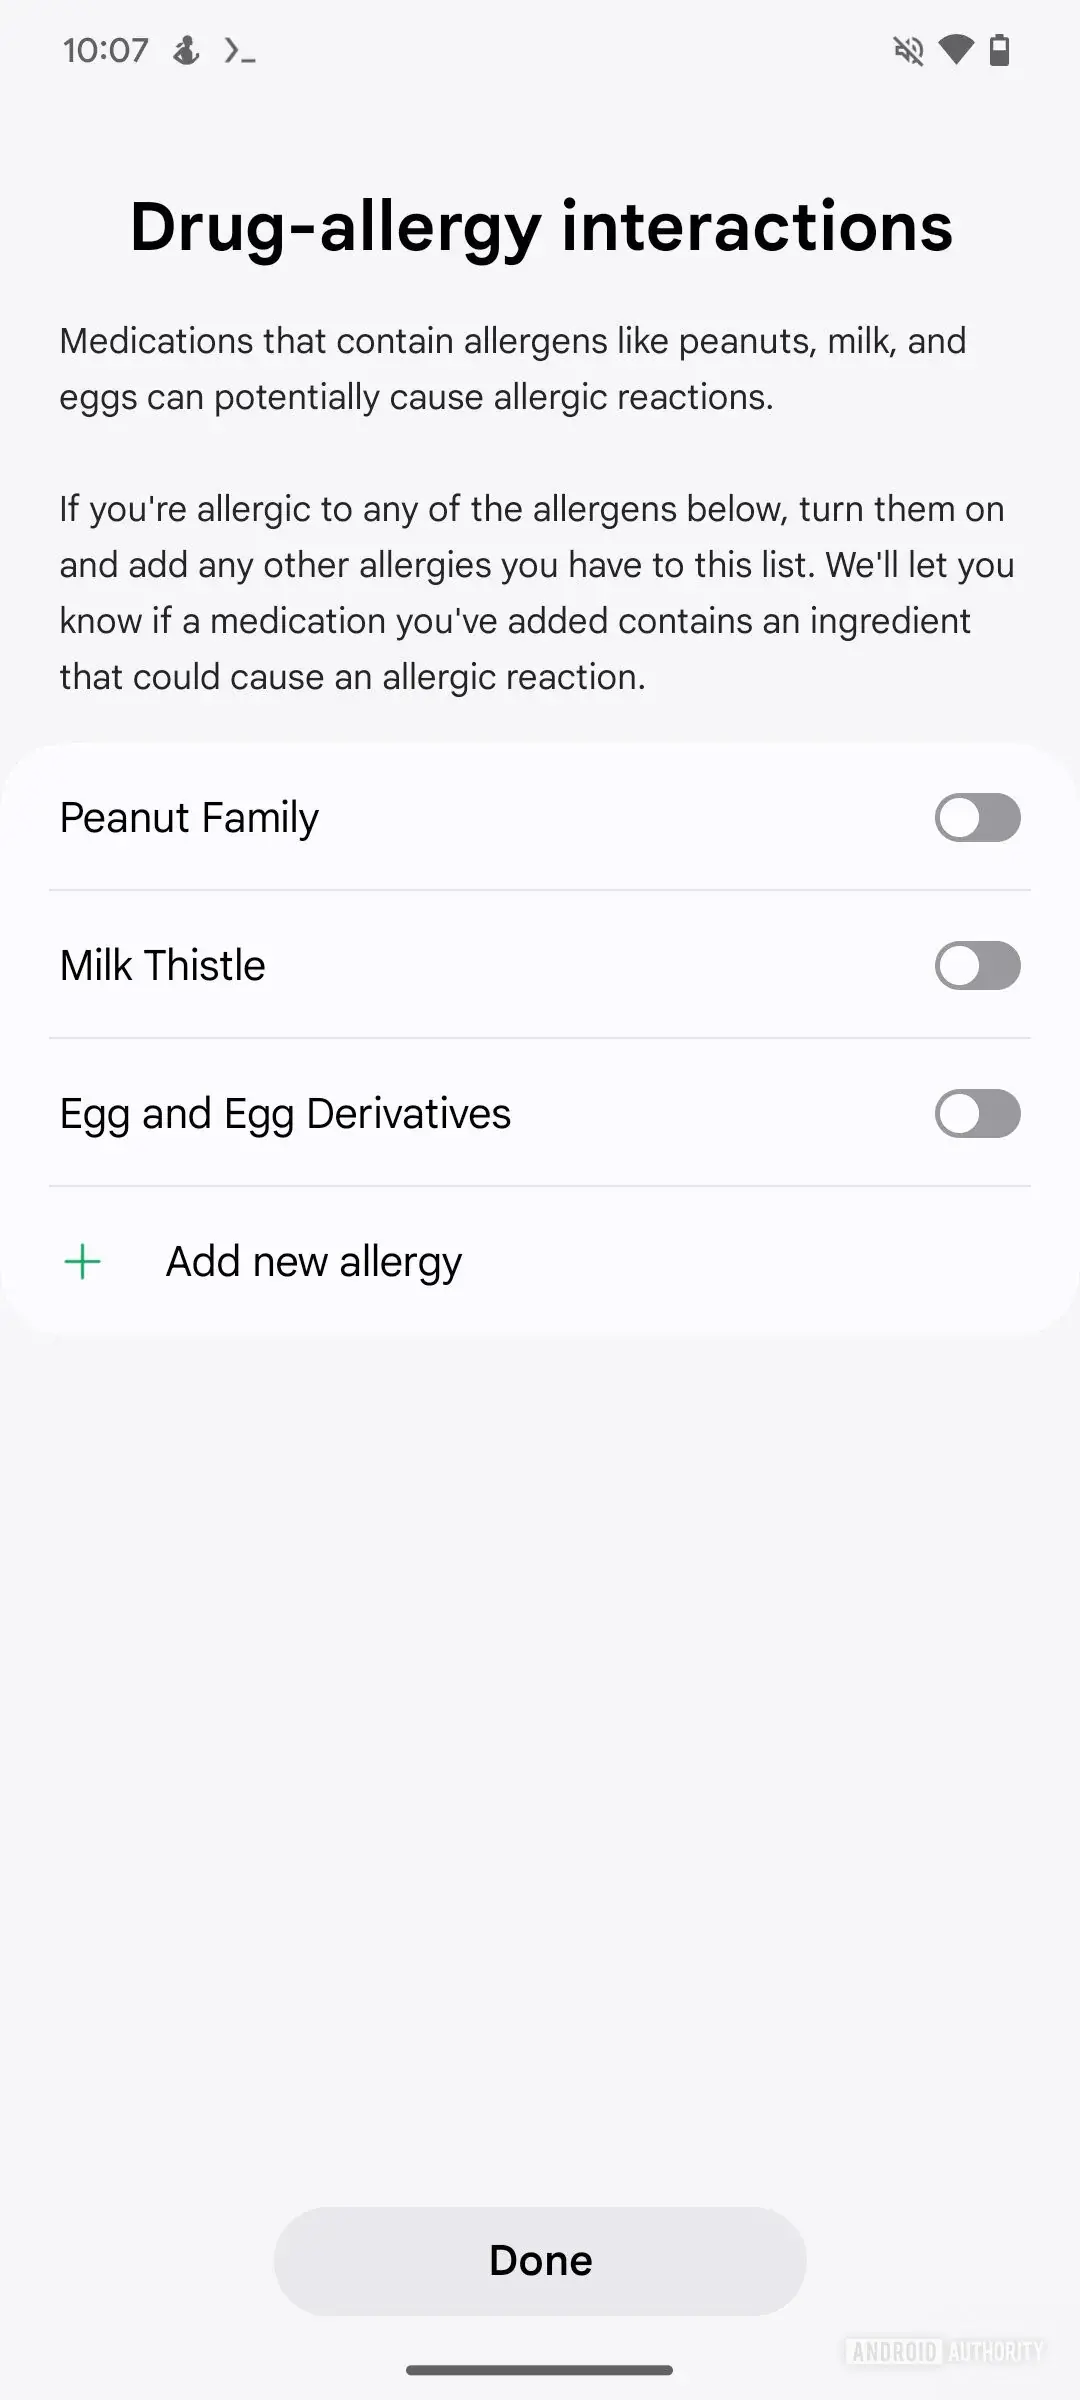 Image Source - Android Authority - Samsung Health may be getting two helpful medication-related features in a future update